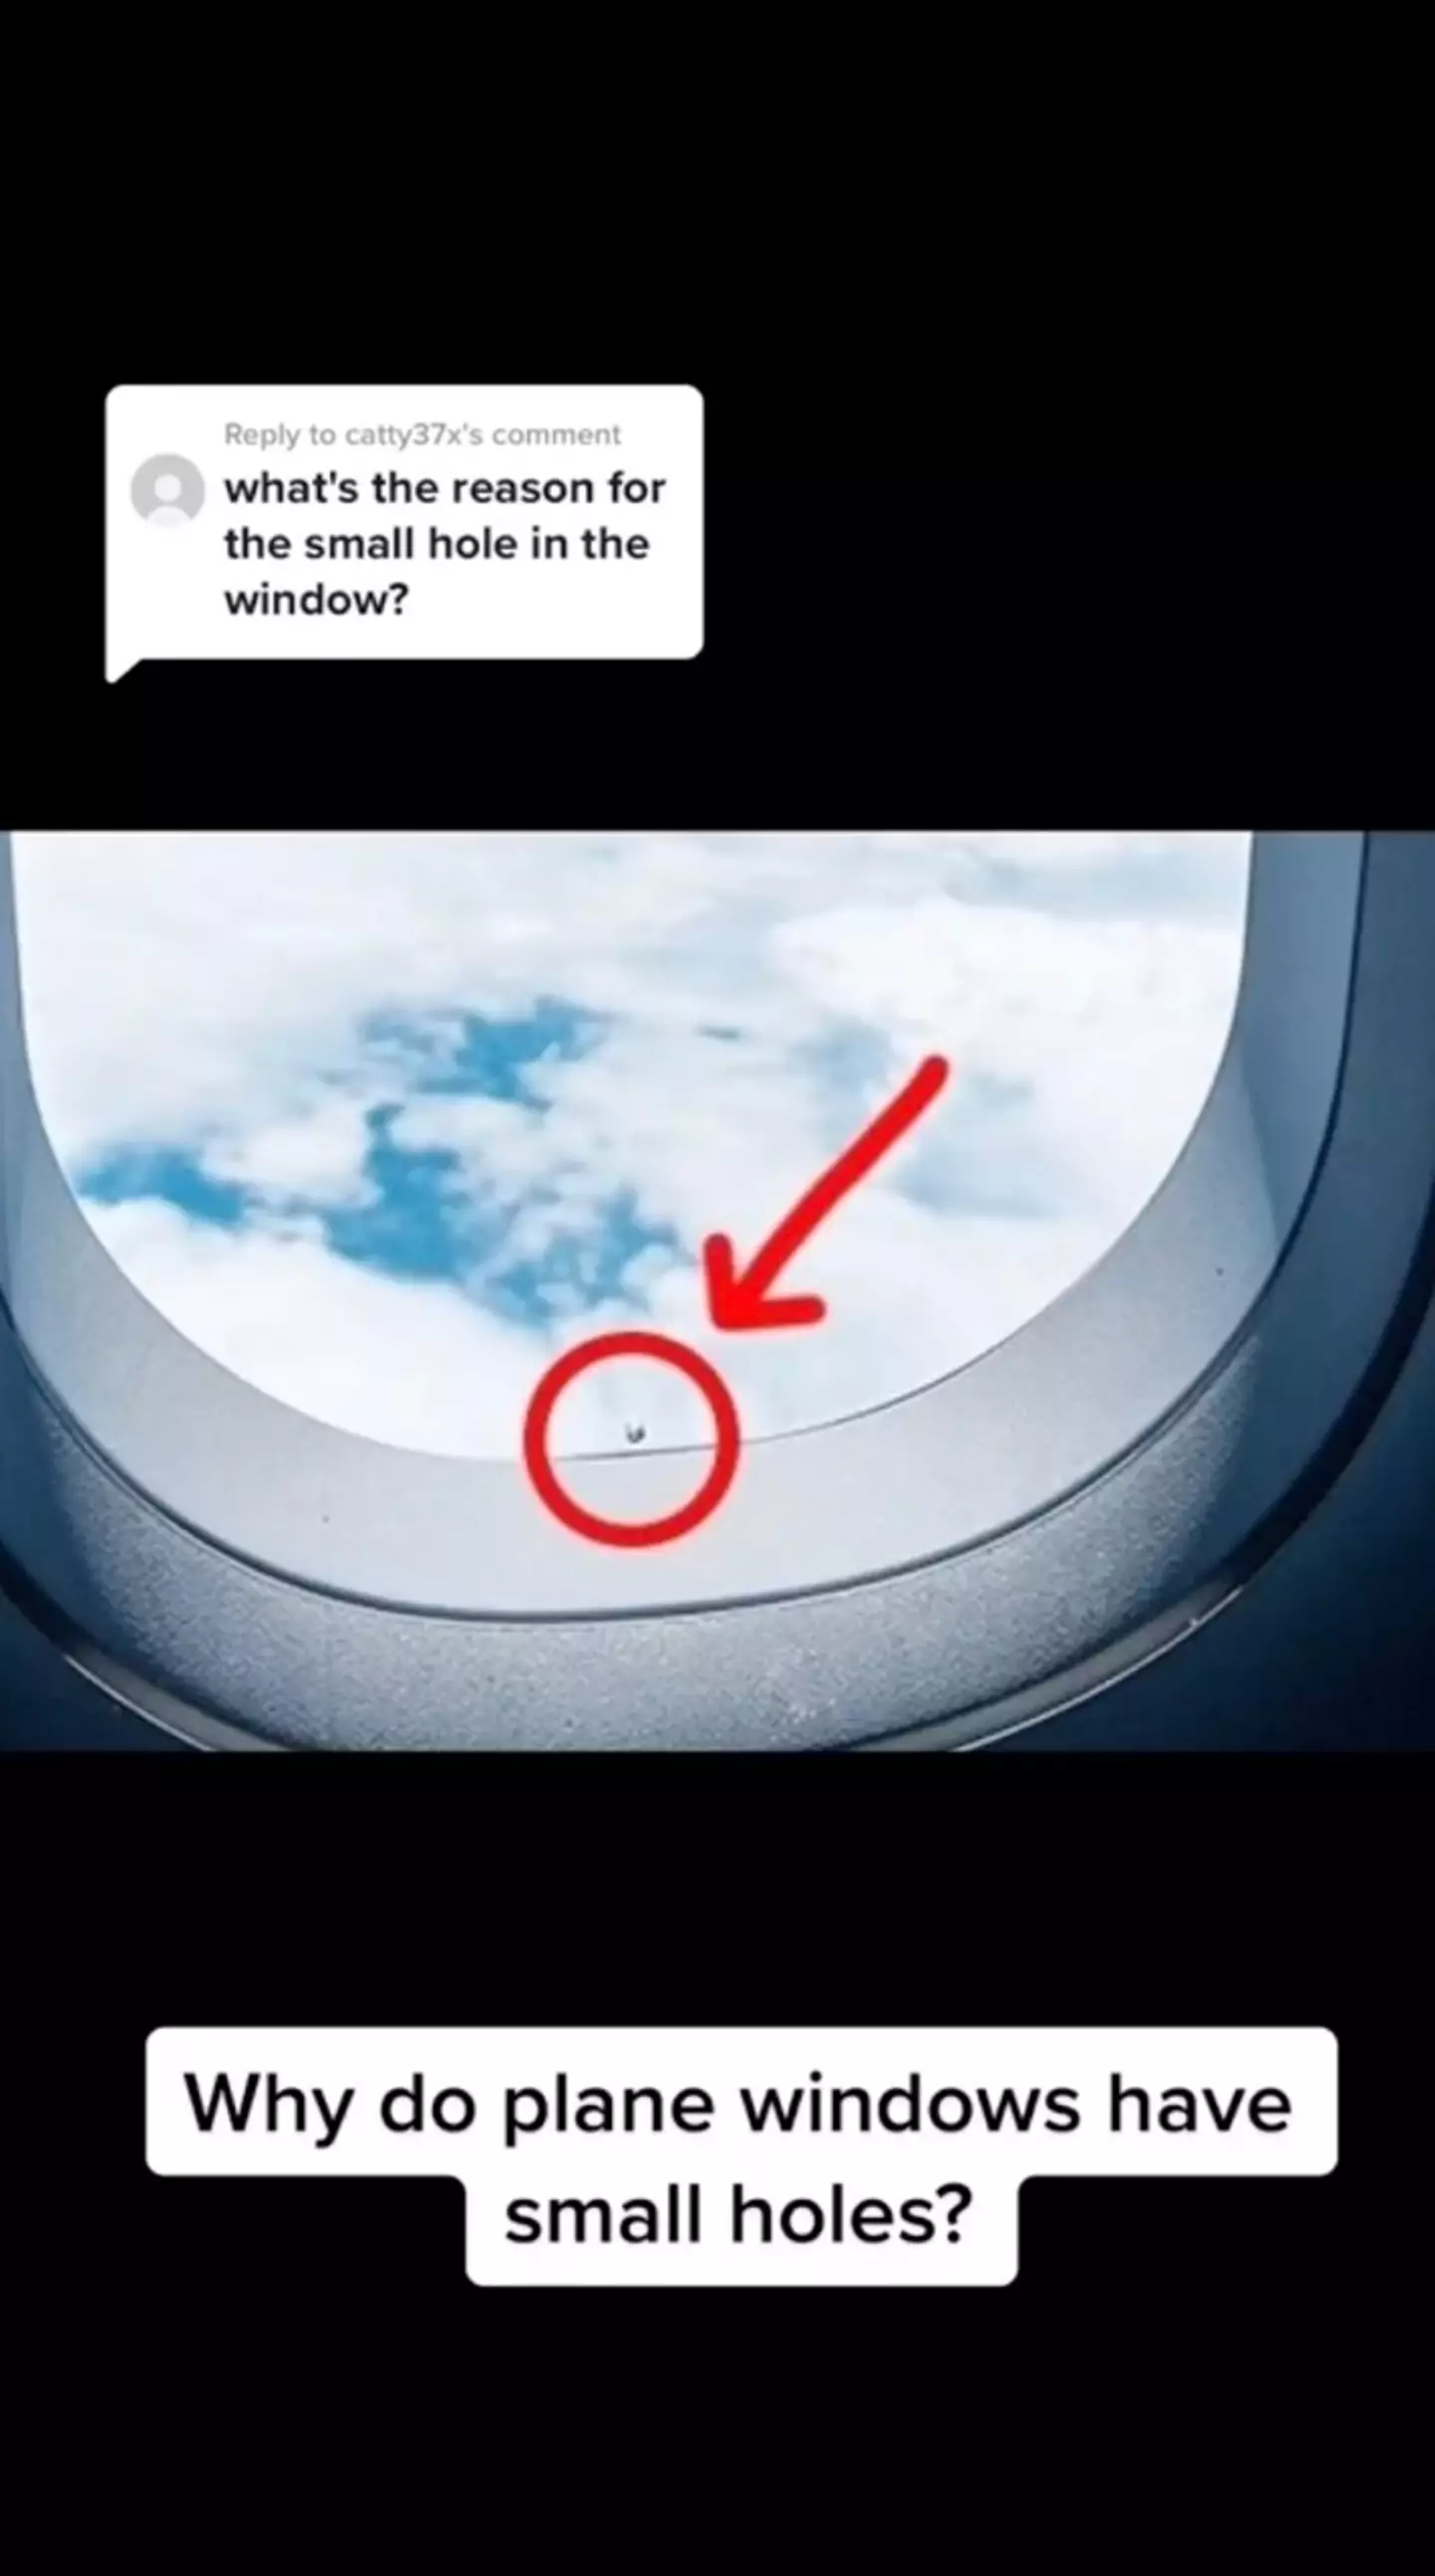 "Aeroplane windows are typically made of three pounds of acrylic," he says.